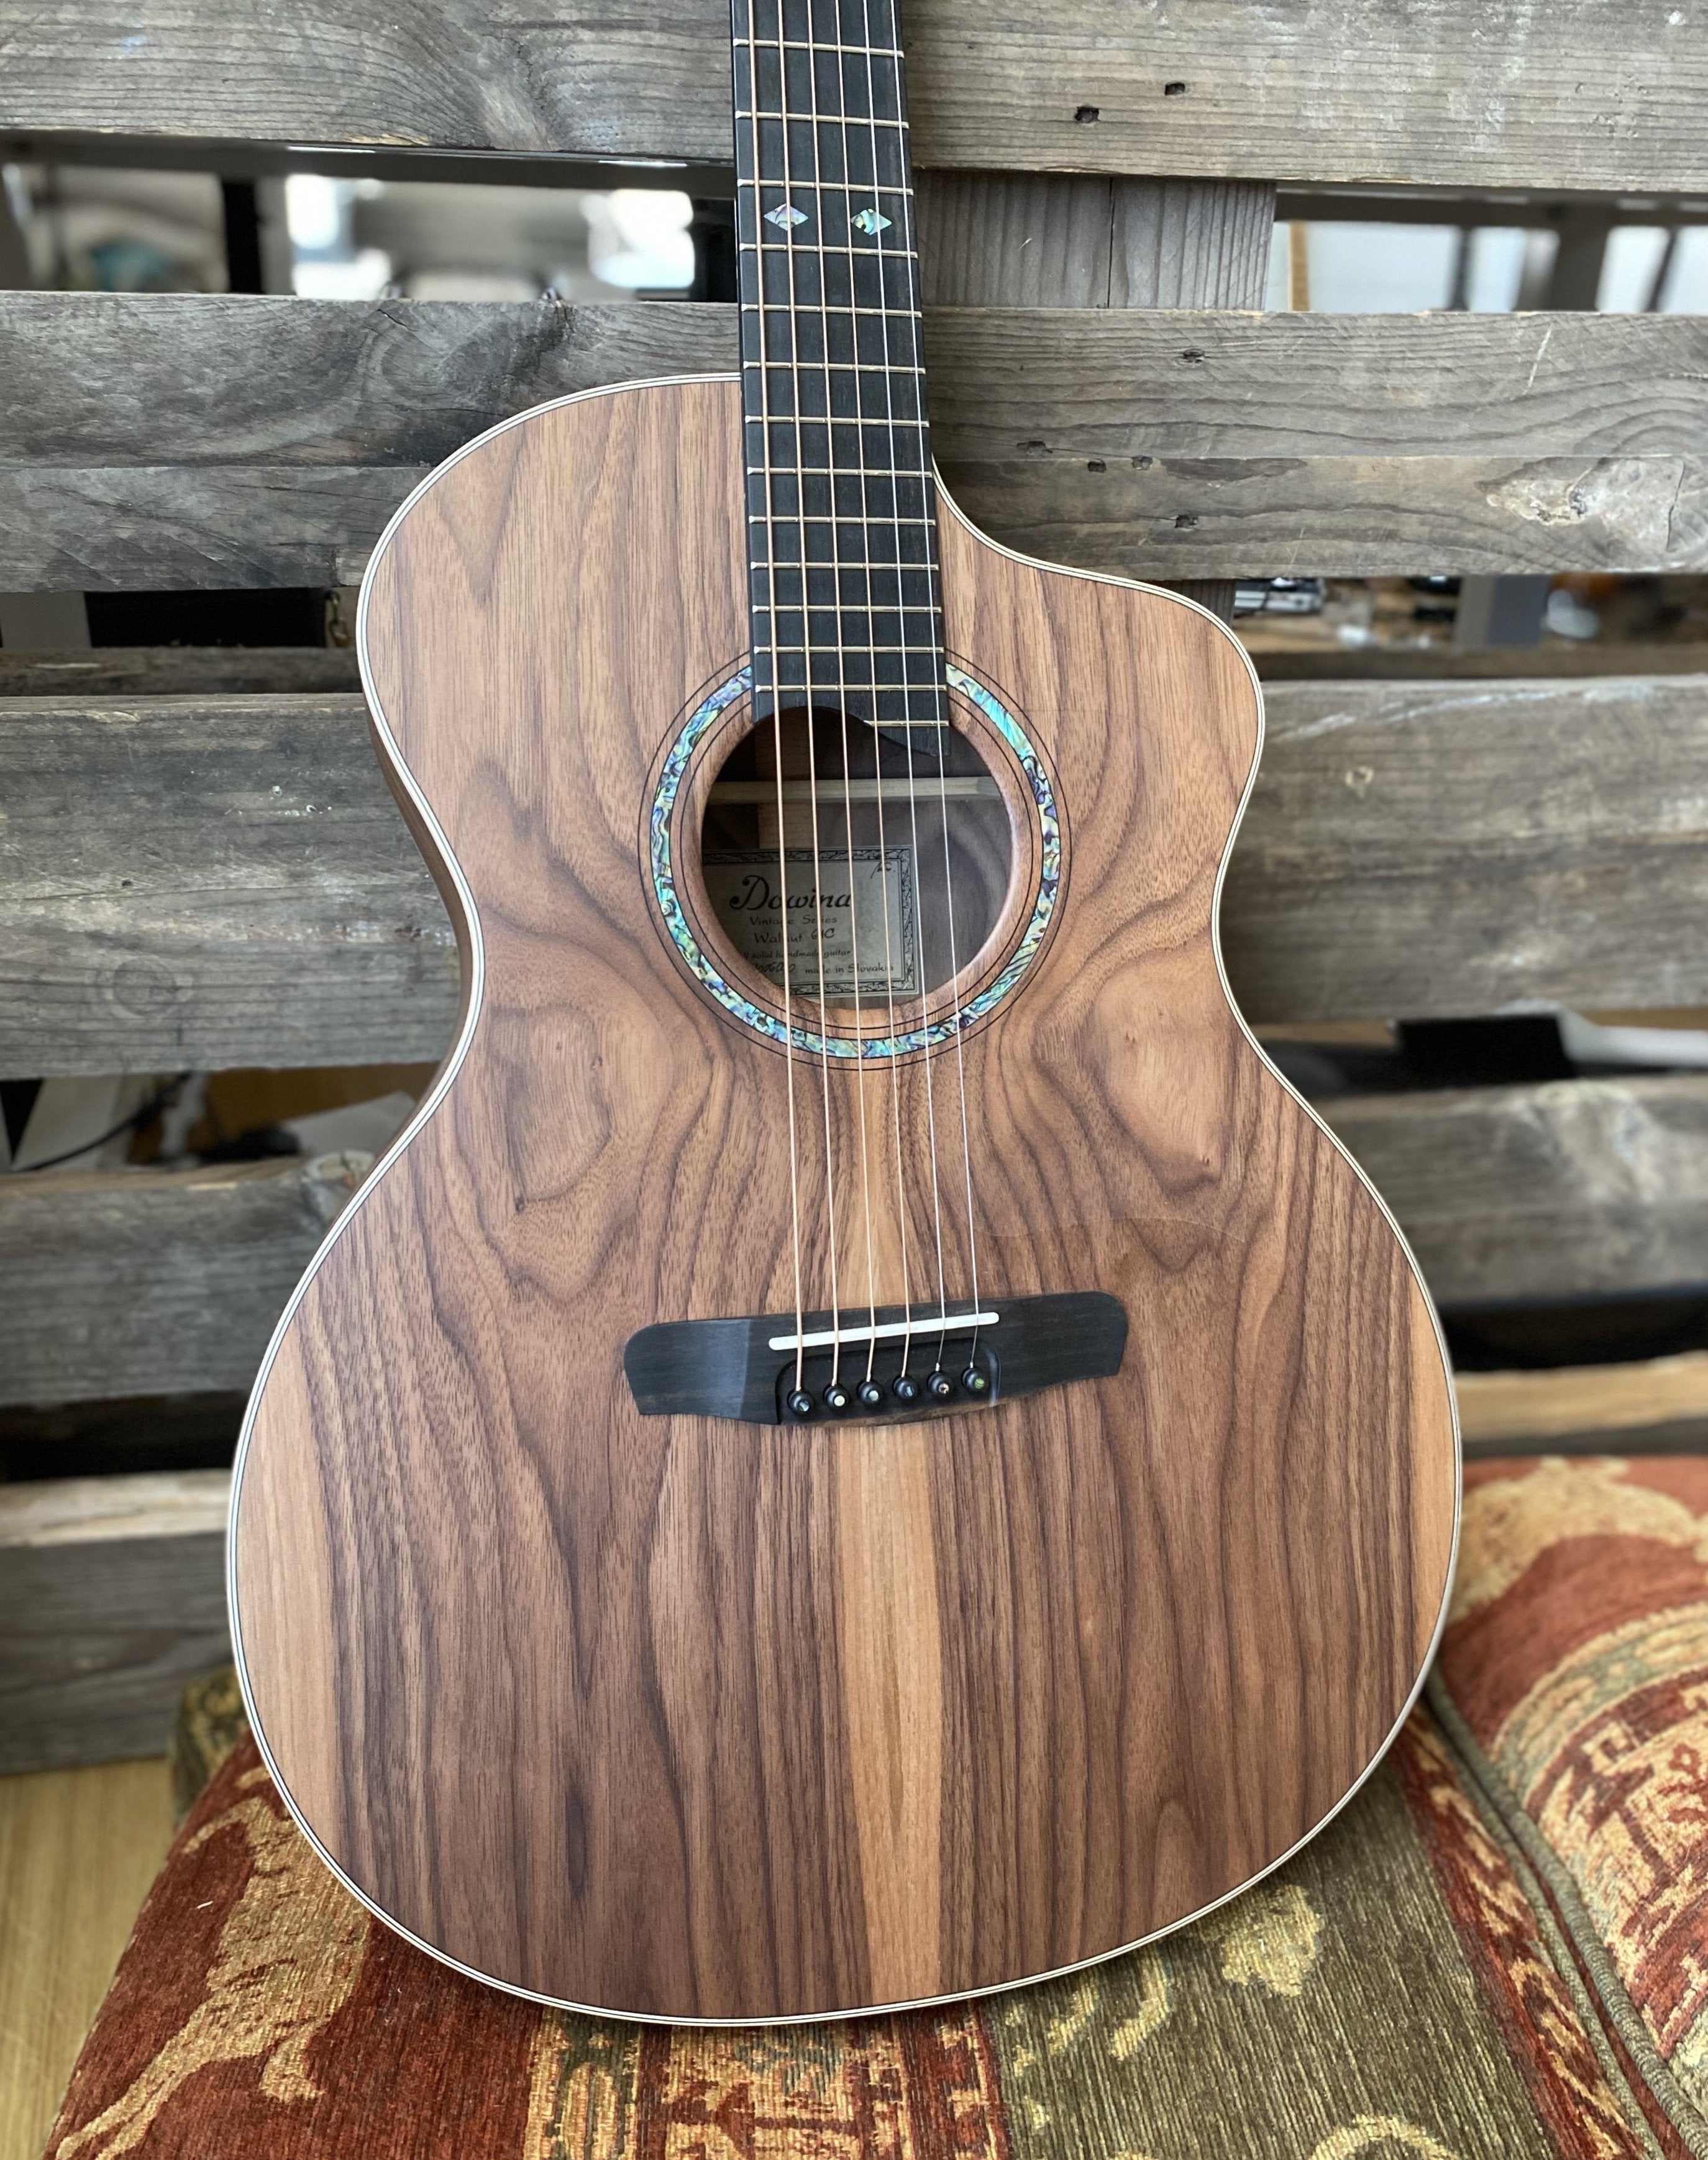 Dowina Walnut Tribute DLX GAC, Acoustic Guitar for sale at Richards Guitars.